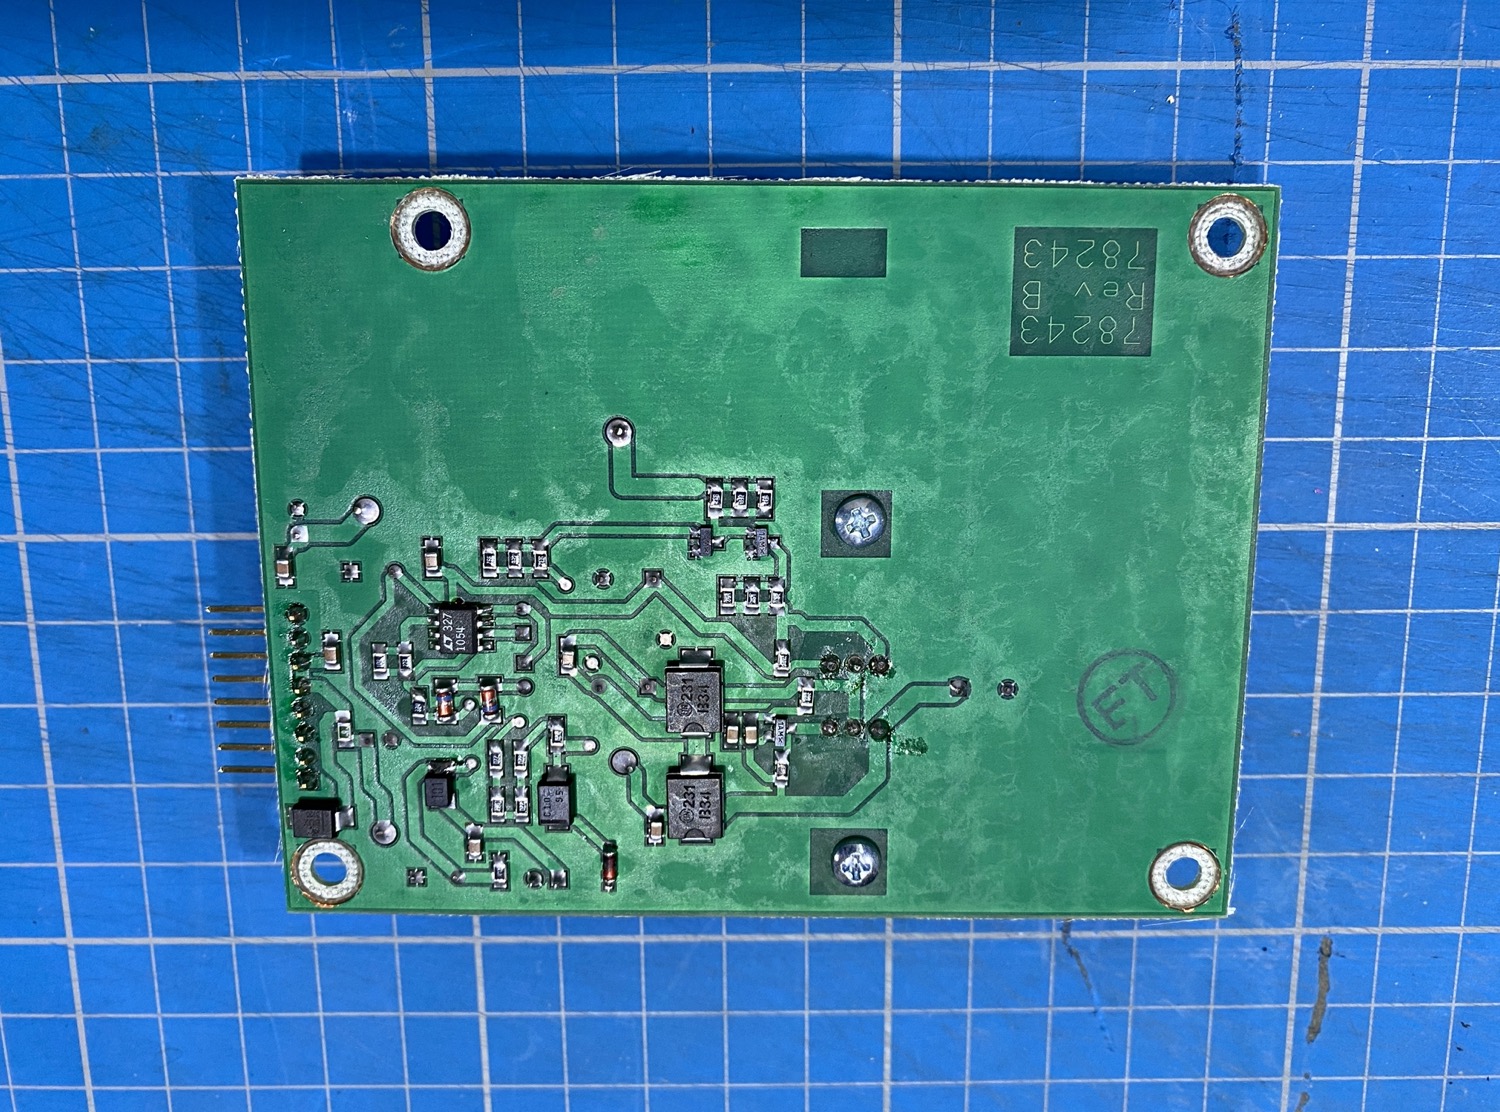 Ten-Tec Orion I Model 565 A9 Power Distribution Board Removed - Bottom View 001